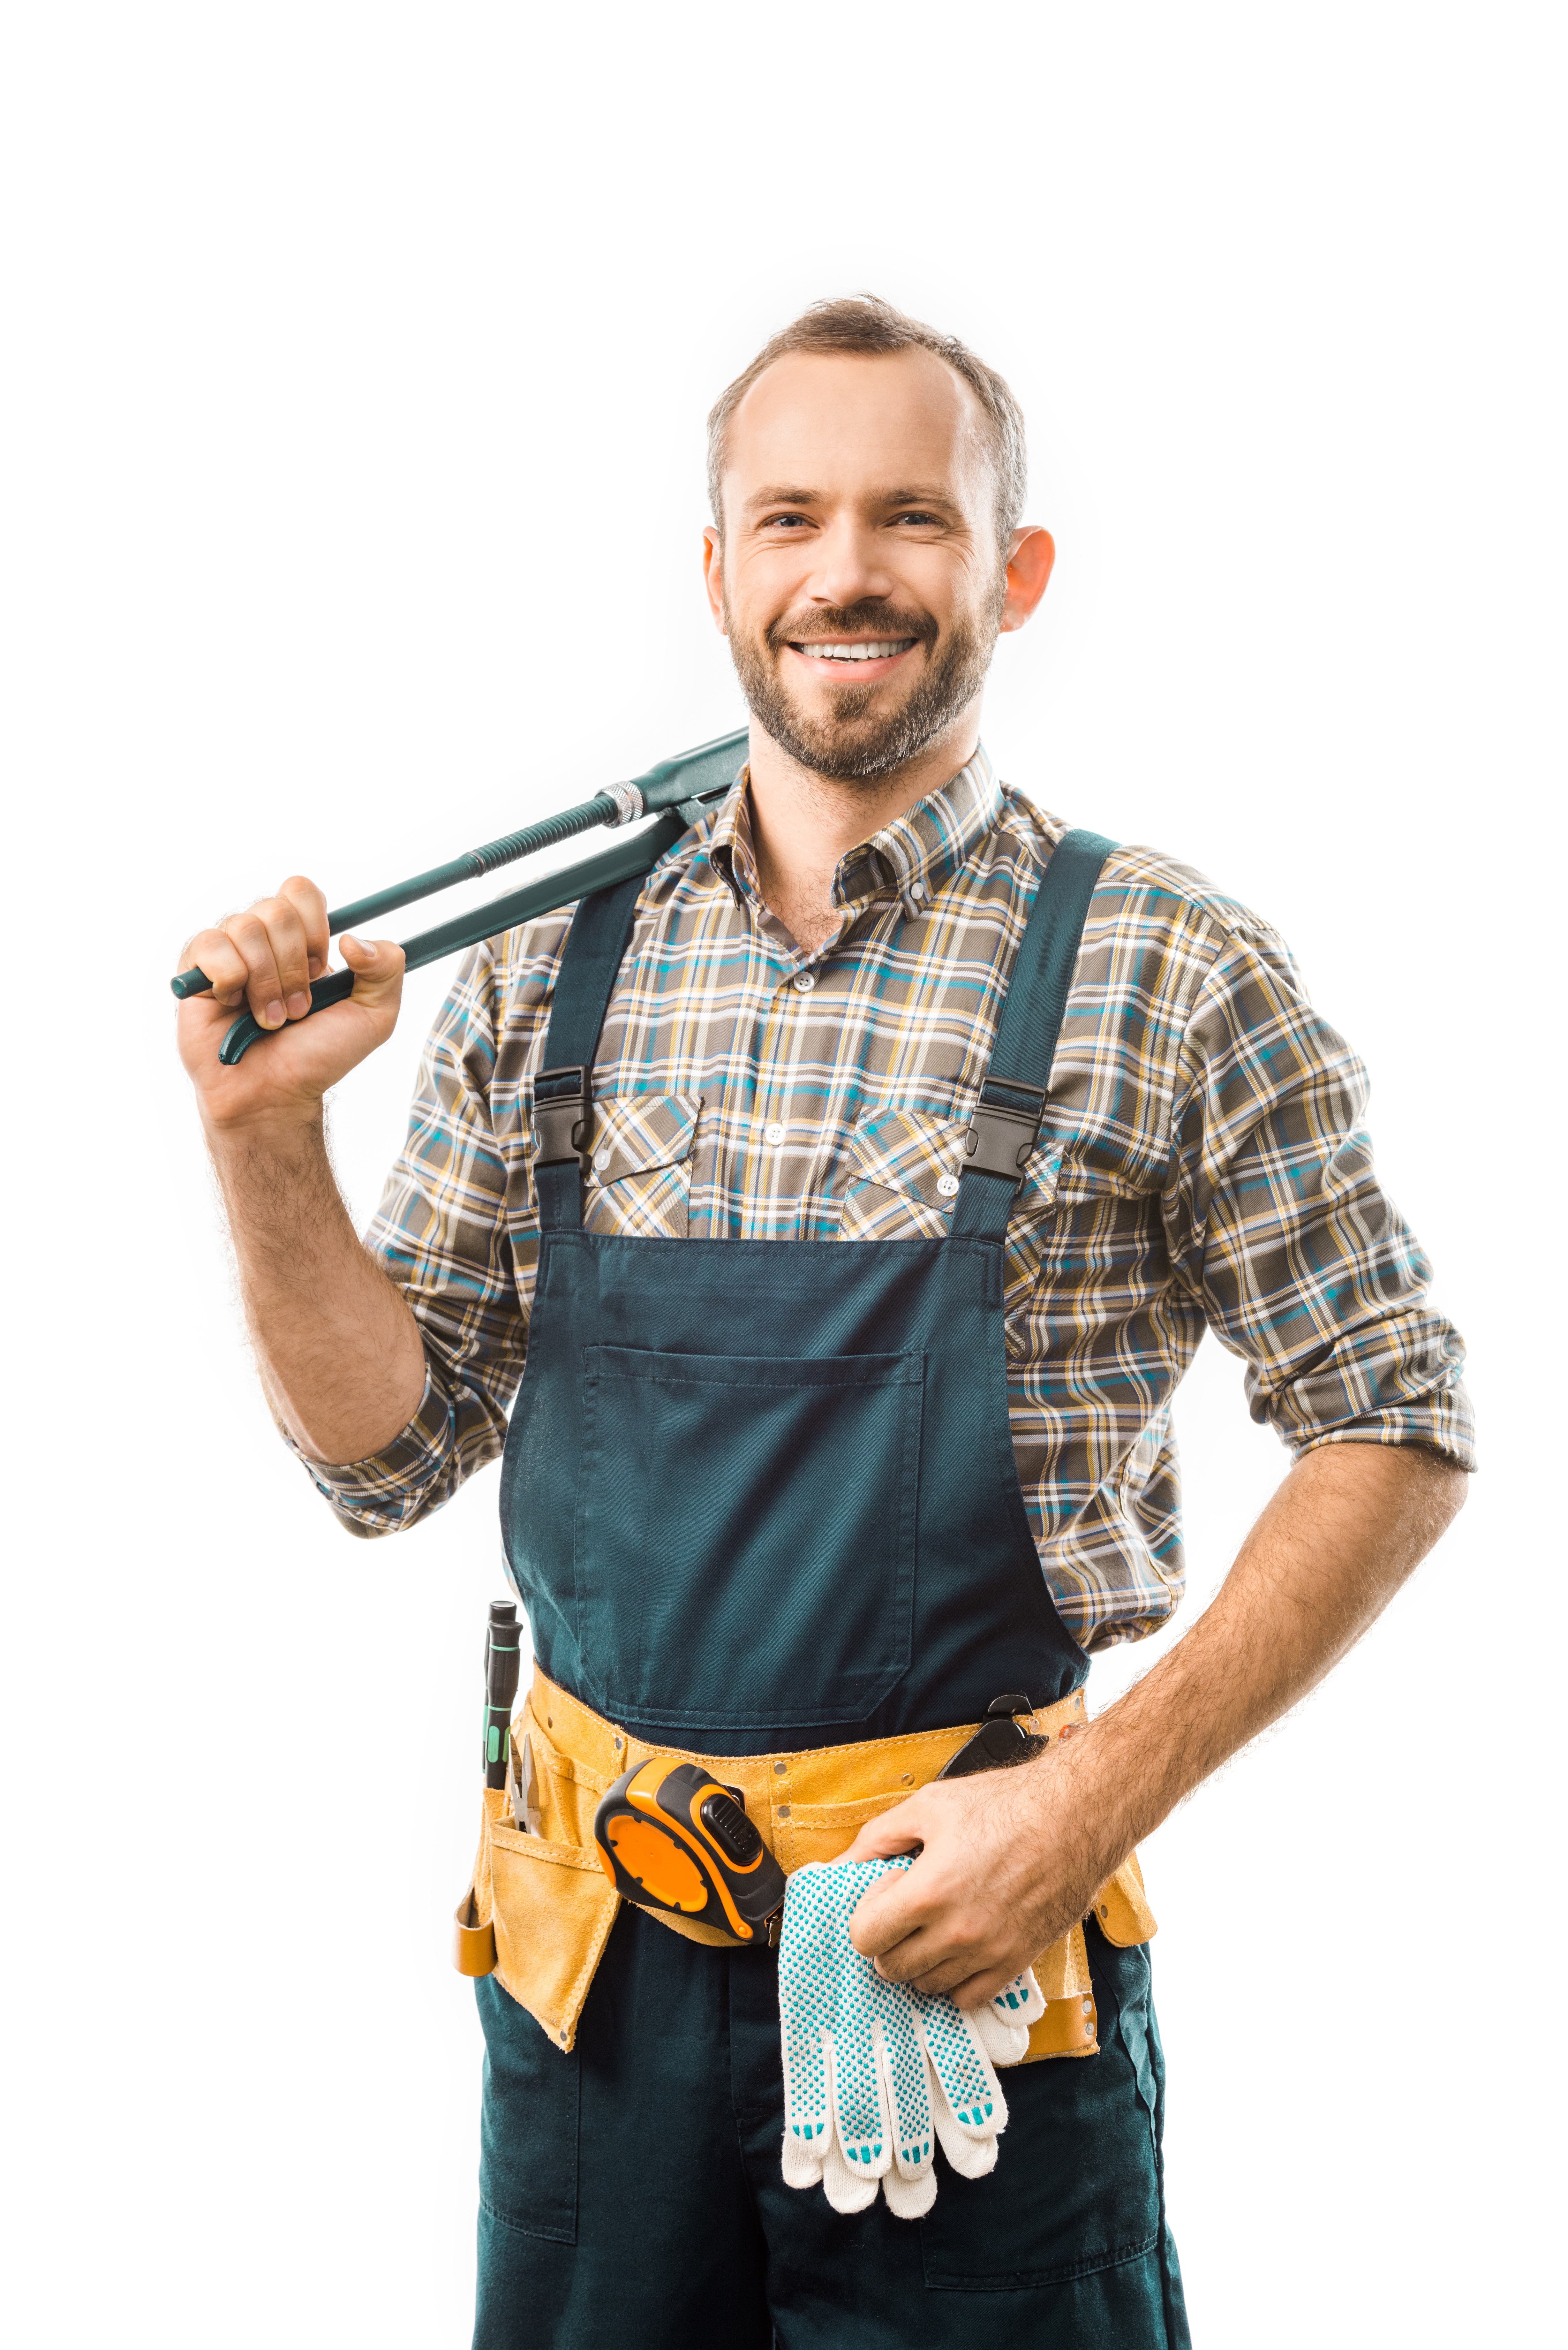 A plumber holding the tools of his trade | Source: Shutterstock